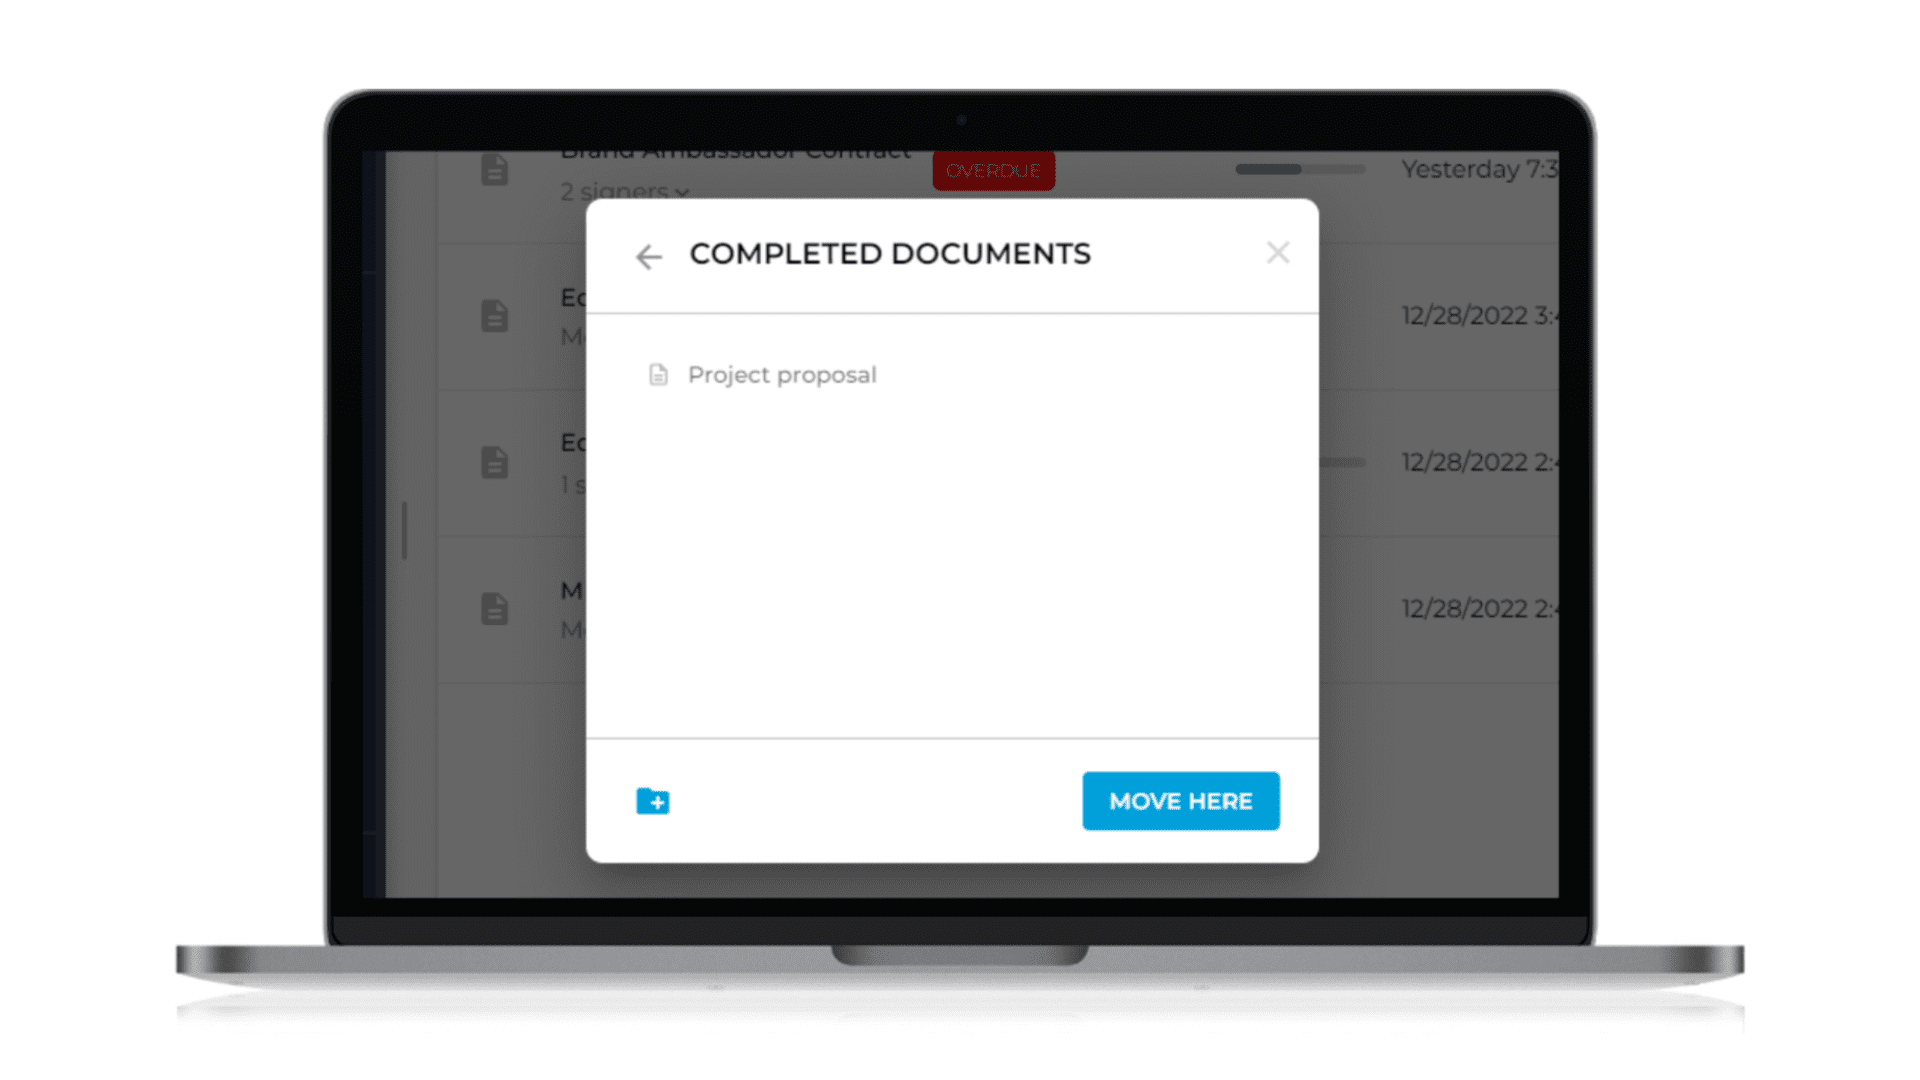 Completed Documents: How to Manage Signed Documents
